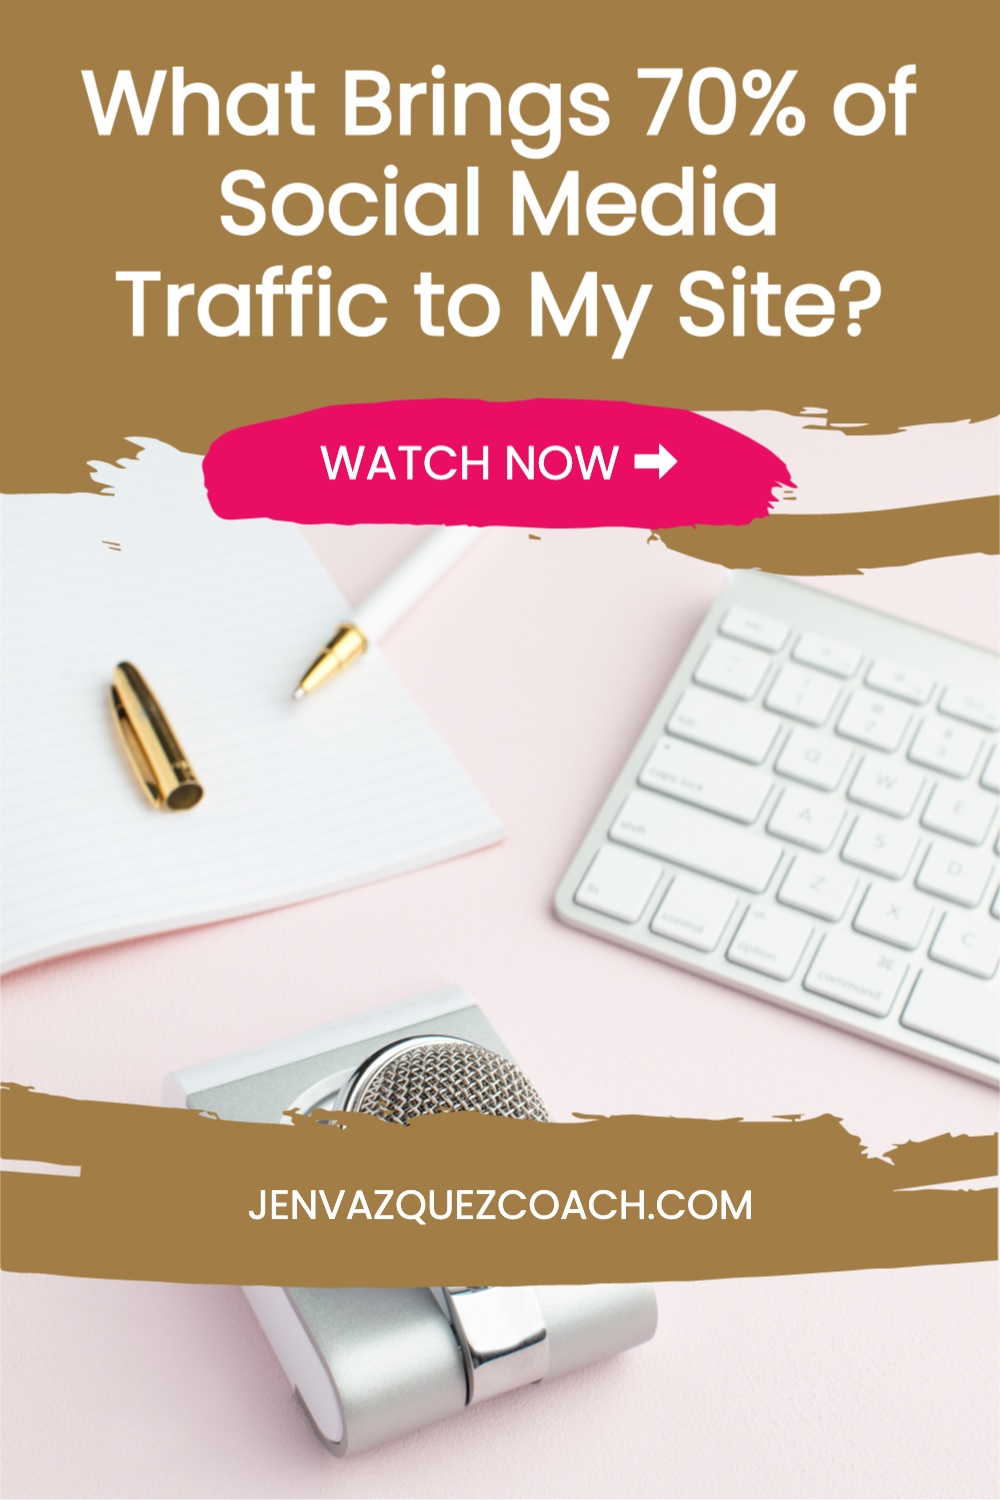 Hacks used to bring 70% of traffic to my site by Jen Vazquez Pinterest Marketing Strategist